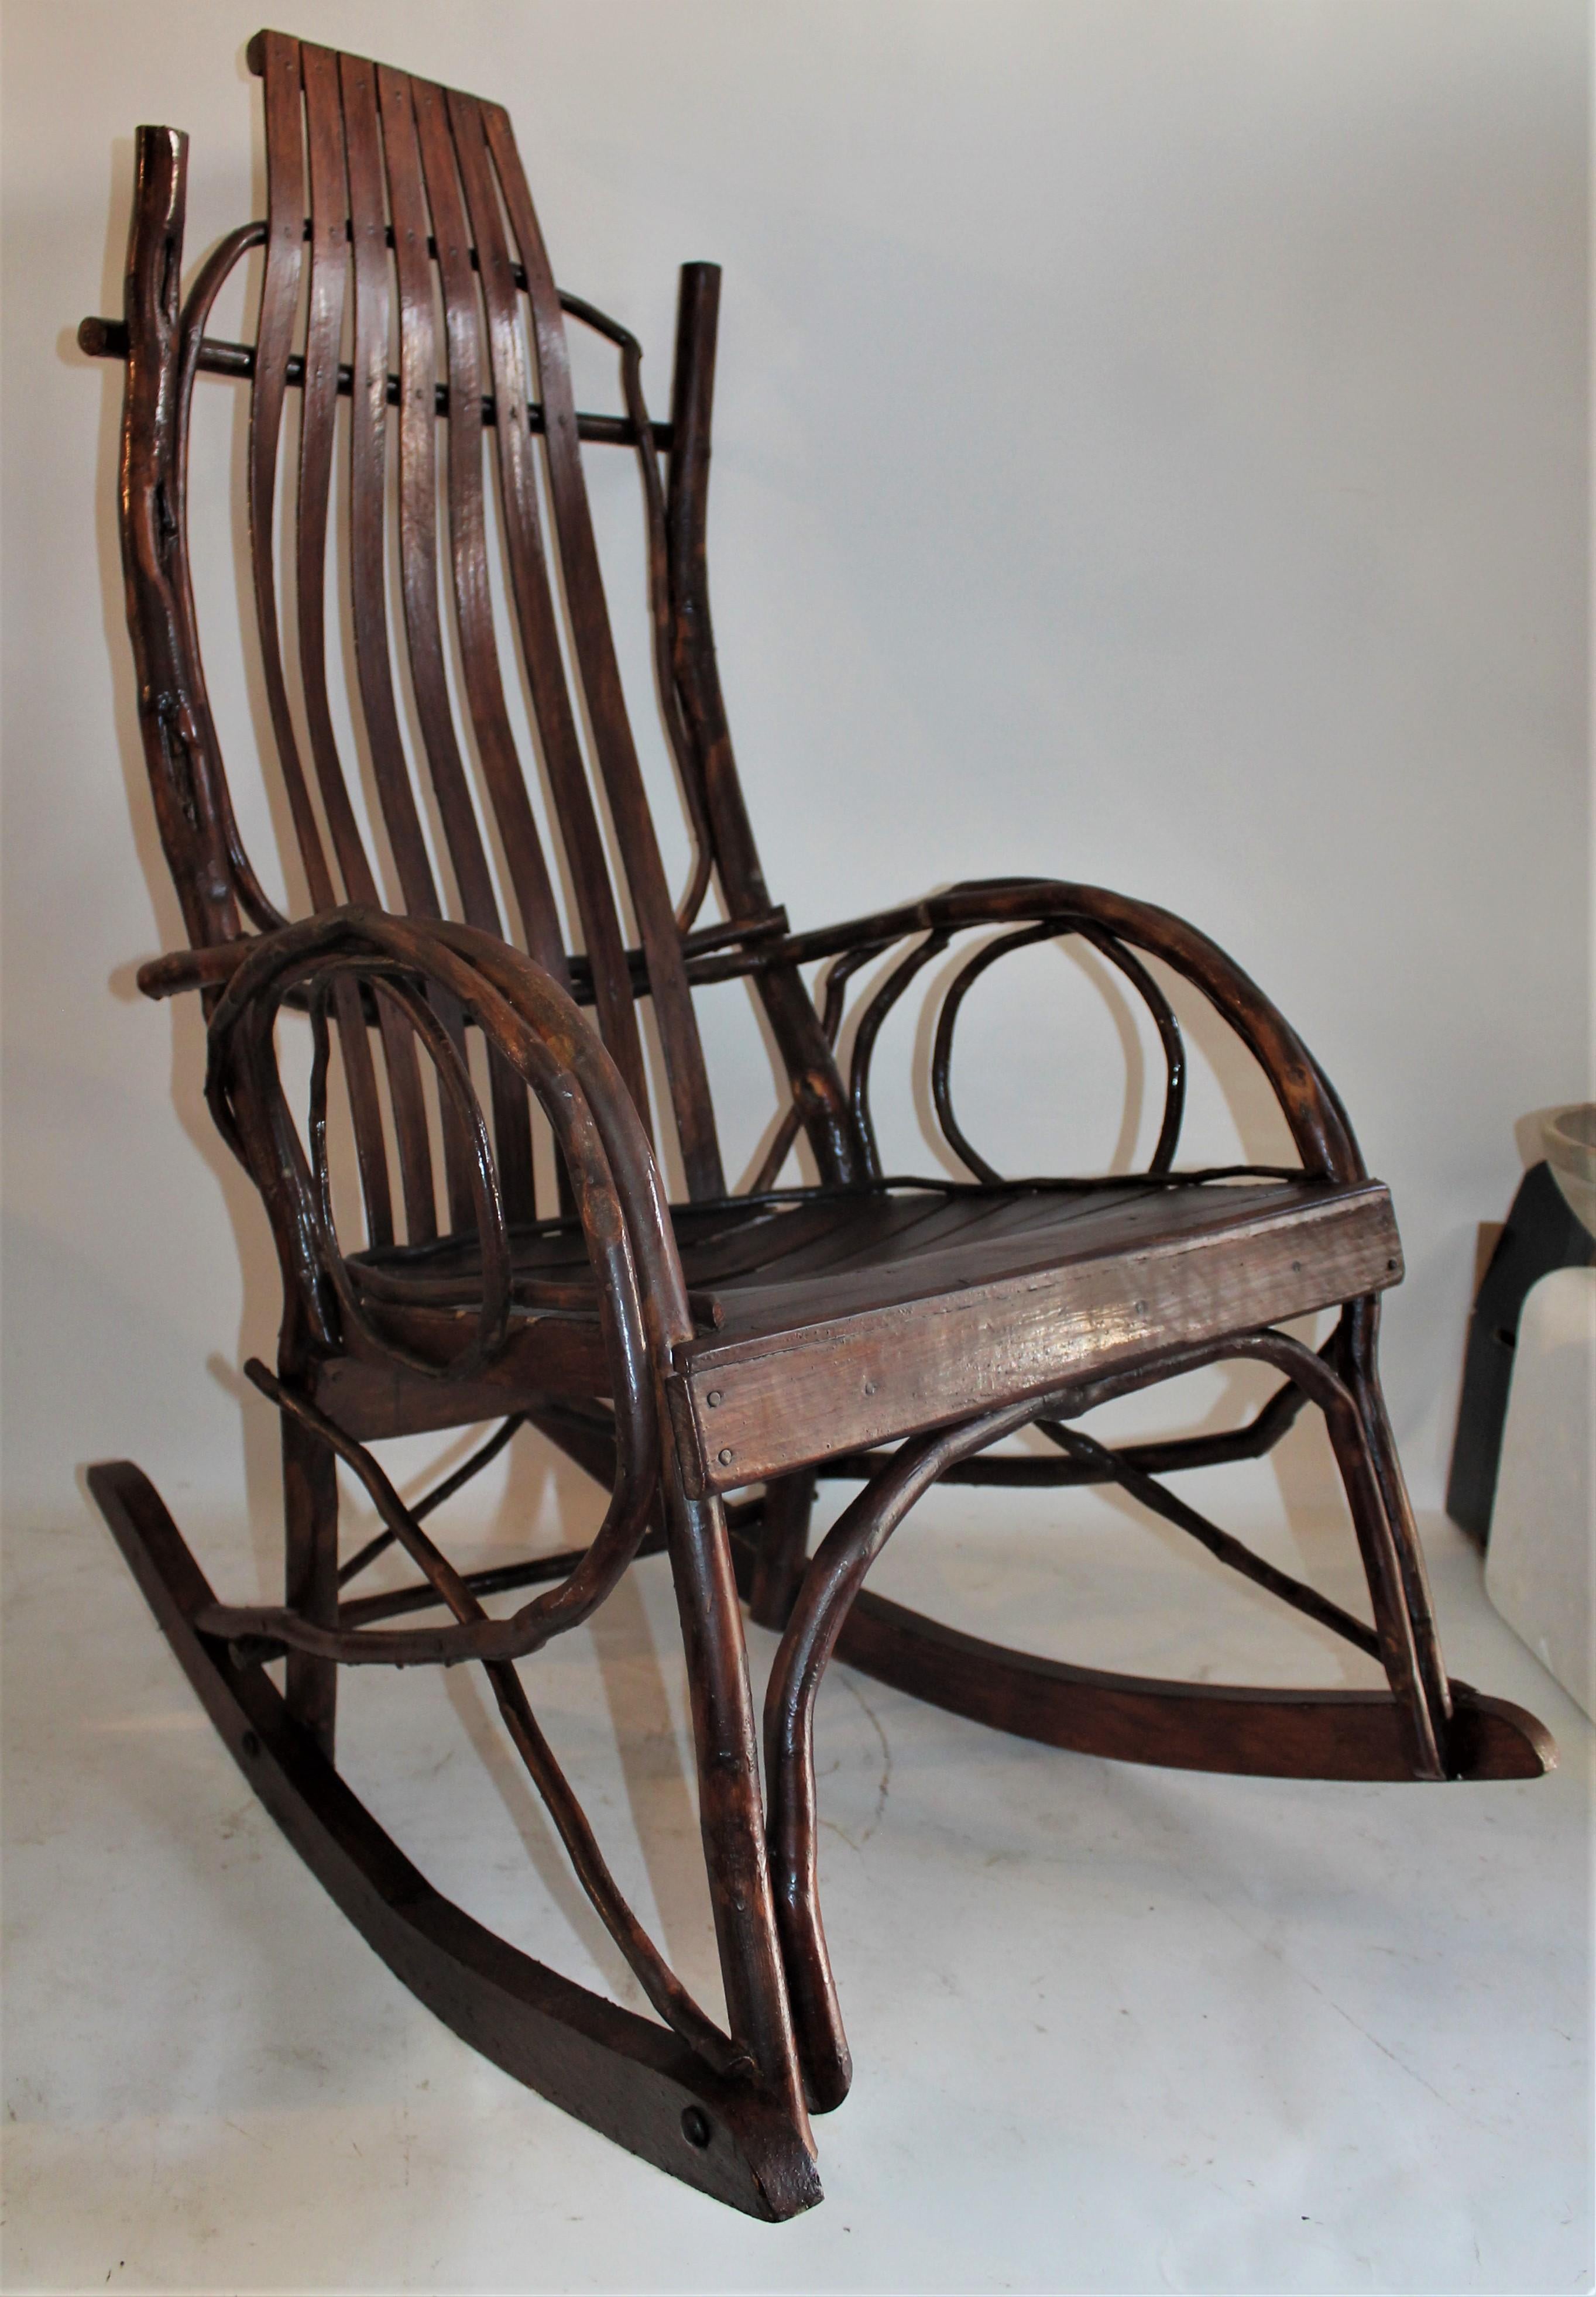 American Amish Bent Wood Rocking Chairs, Adults and Child's, 2